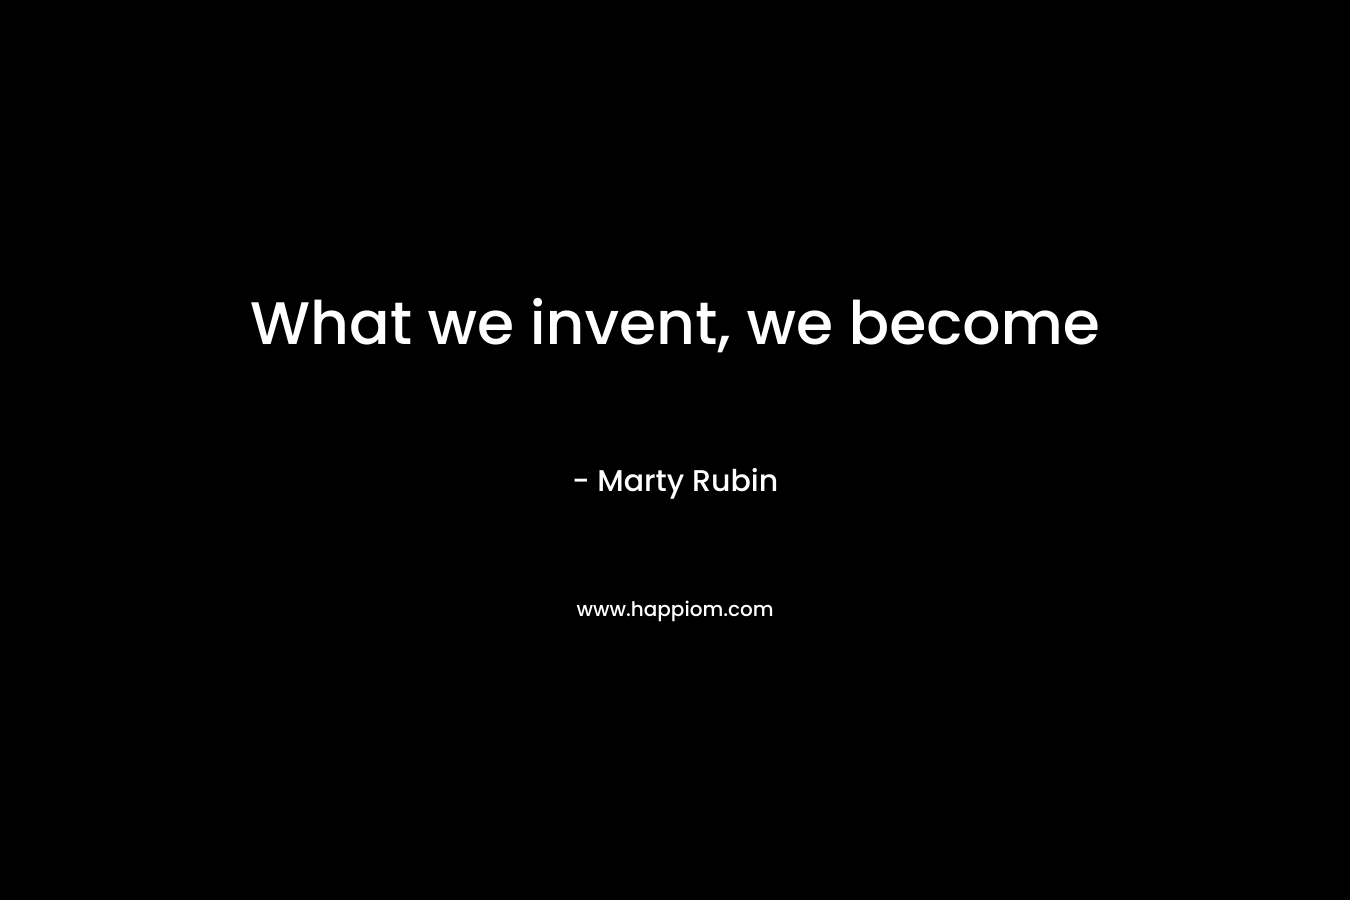 What we invent, we become